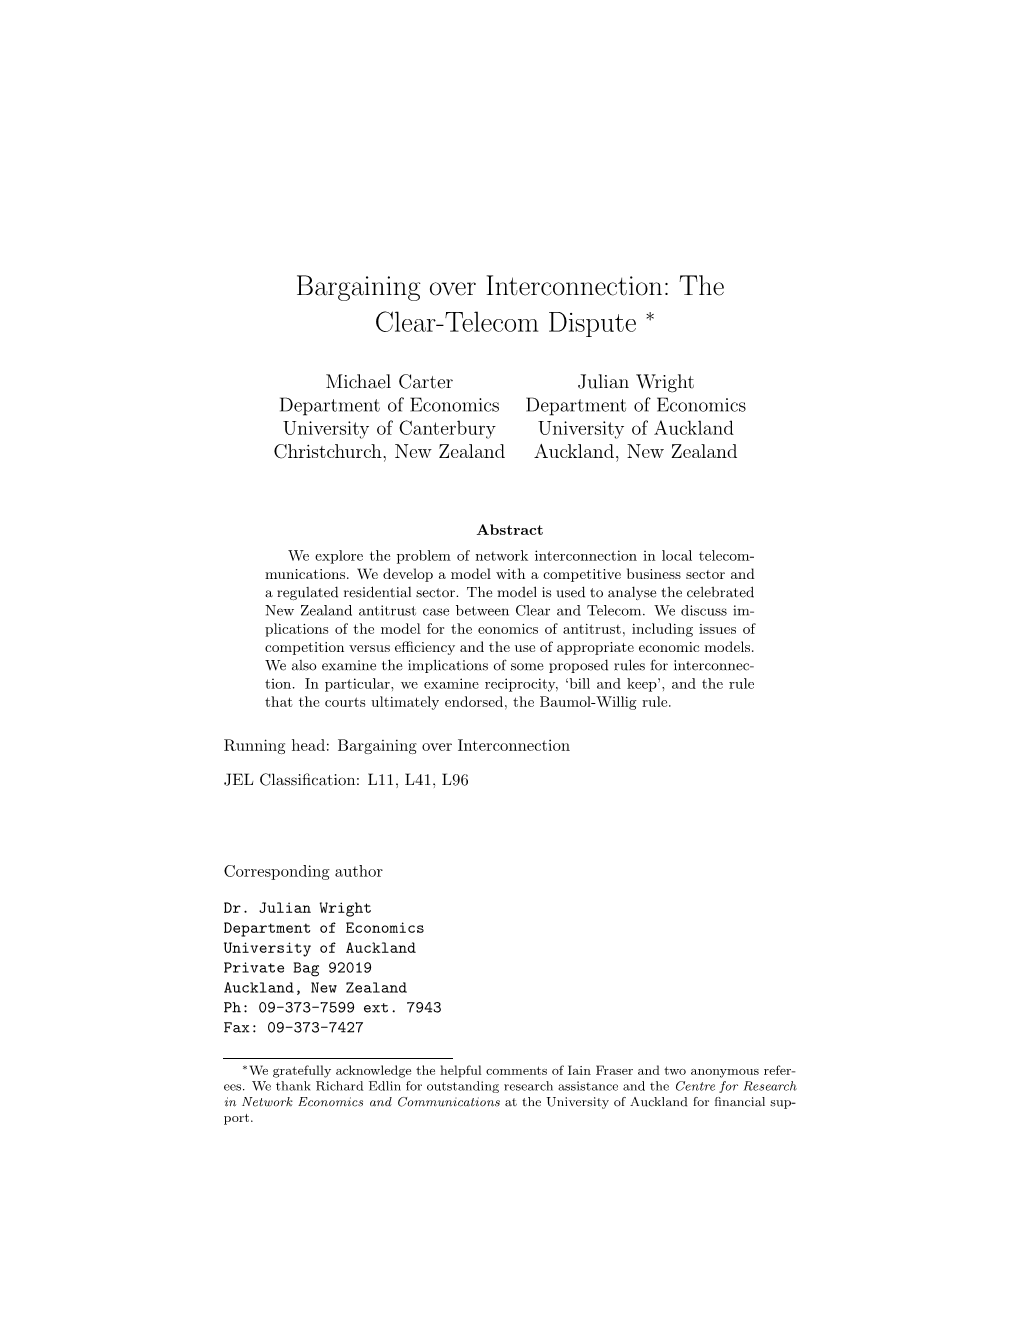 Bargaining Over Interconnection: the Clear-Telecom Dispute ∗